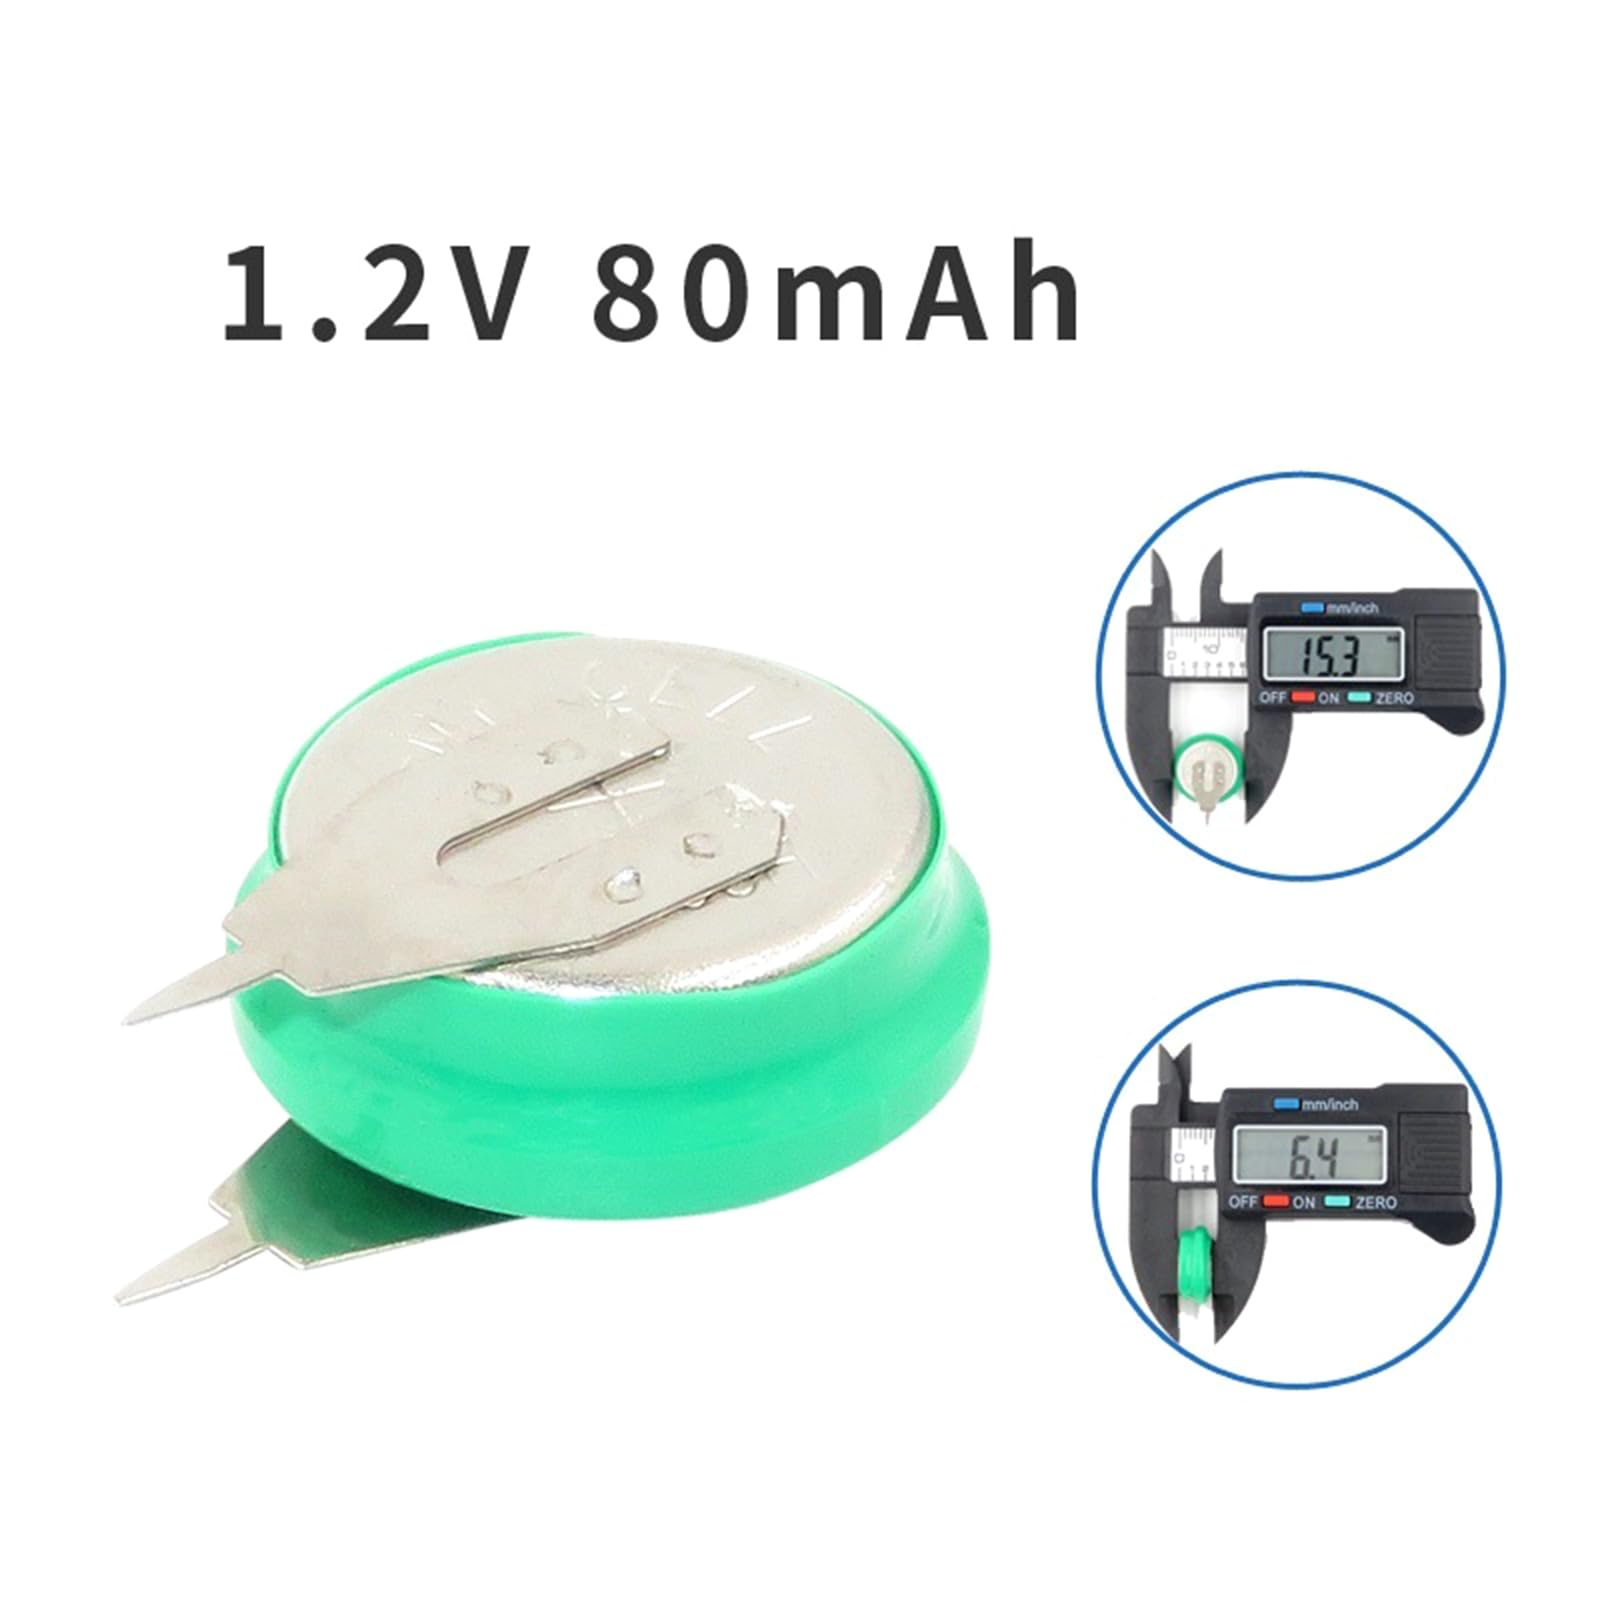 CHIUEAST High Capacity NiMh Rechargeable Batteries Long Lasting 1.2V 80mAh Coin Cell Batteries with Solder Pins for Electric Toy